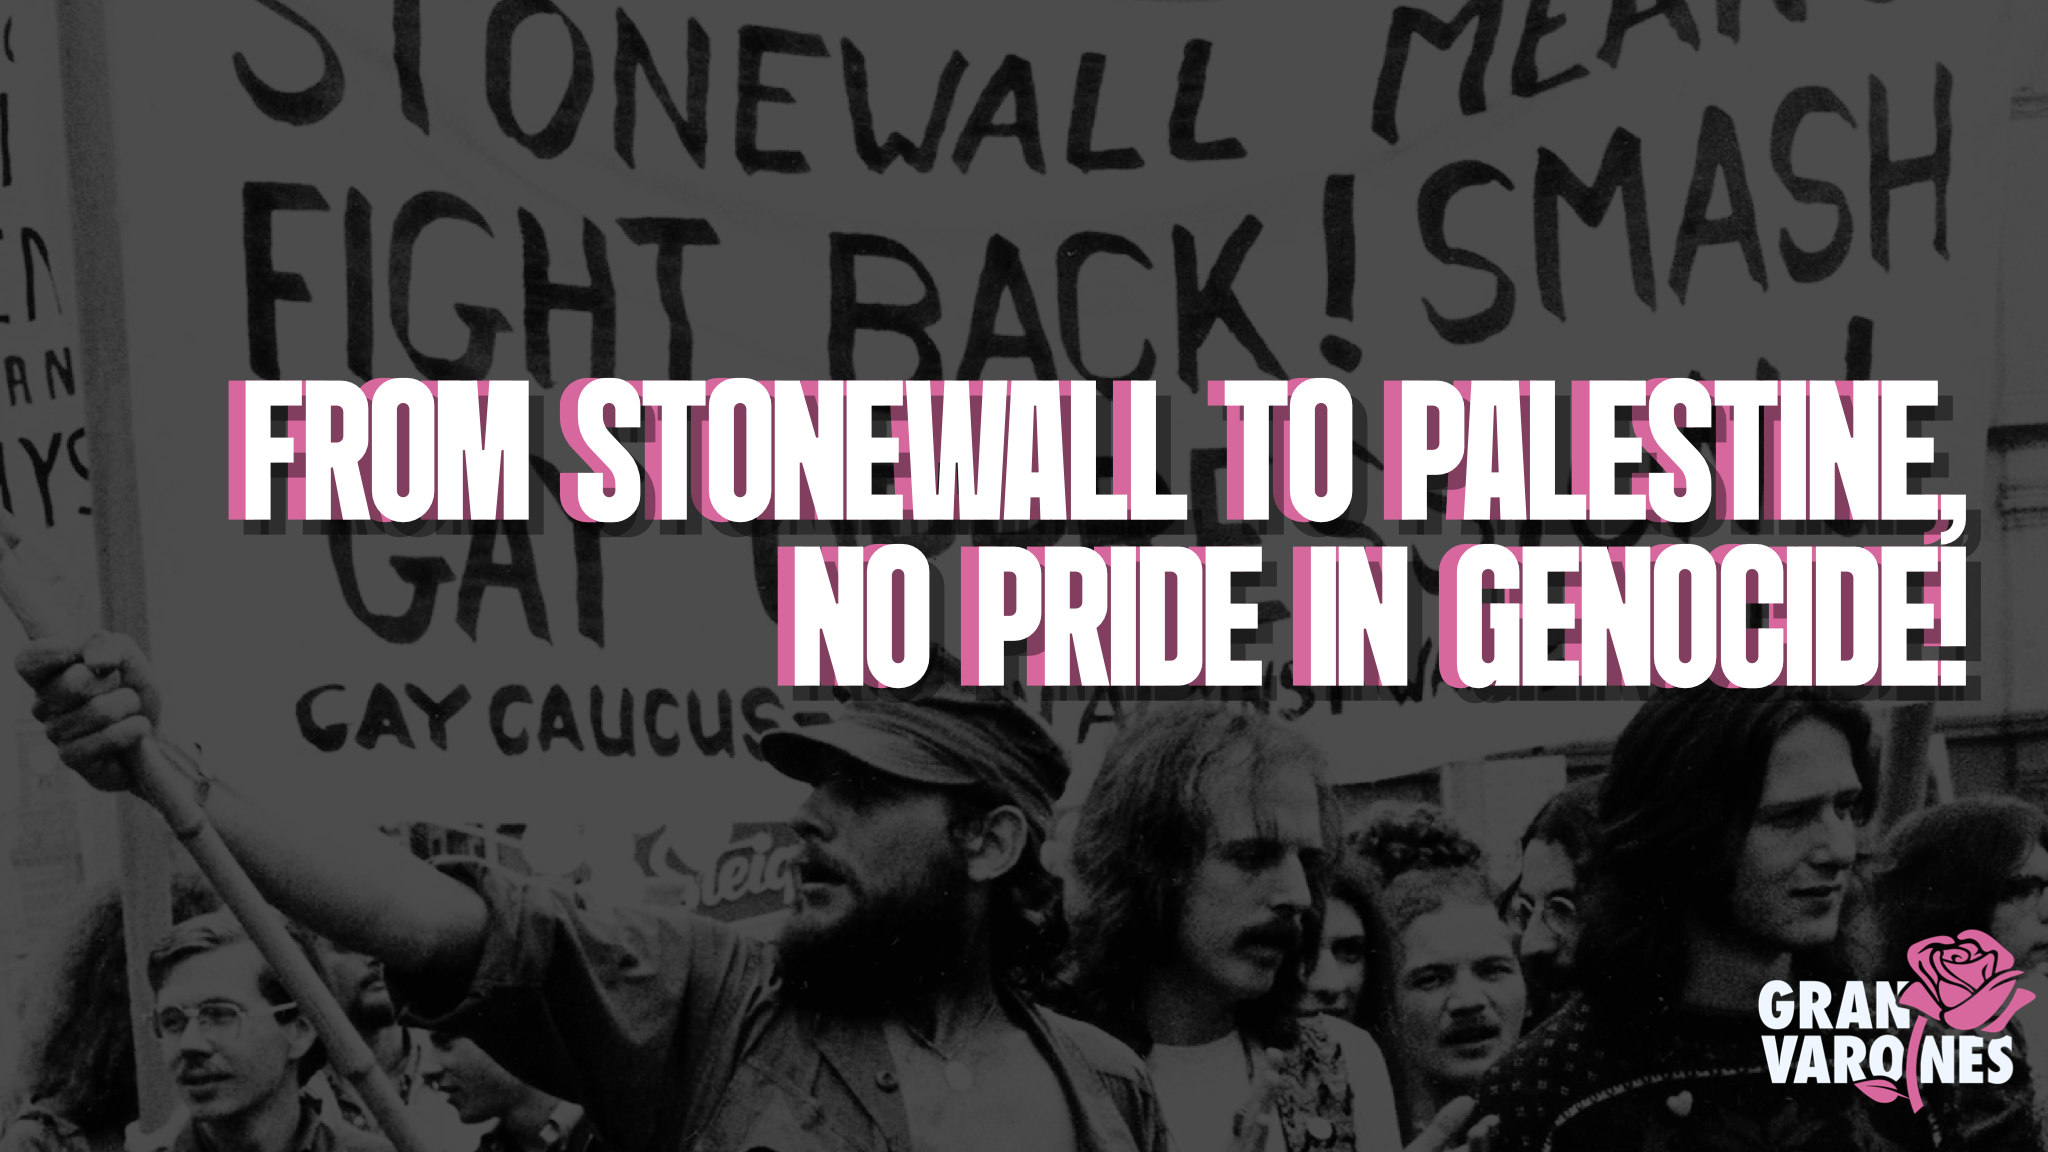 picture of people marching holding up a sign that reads "Stonewall Means Fight Back!"